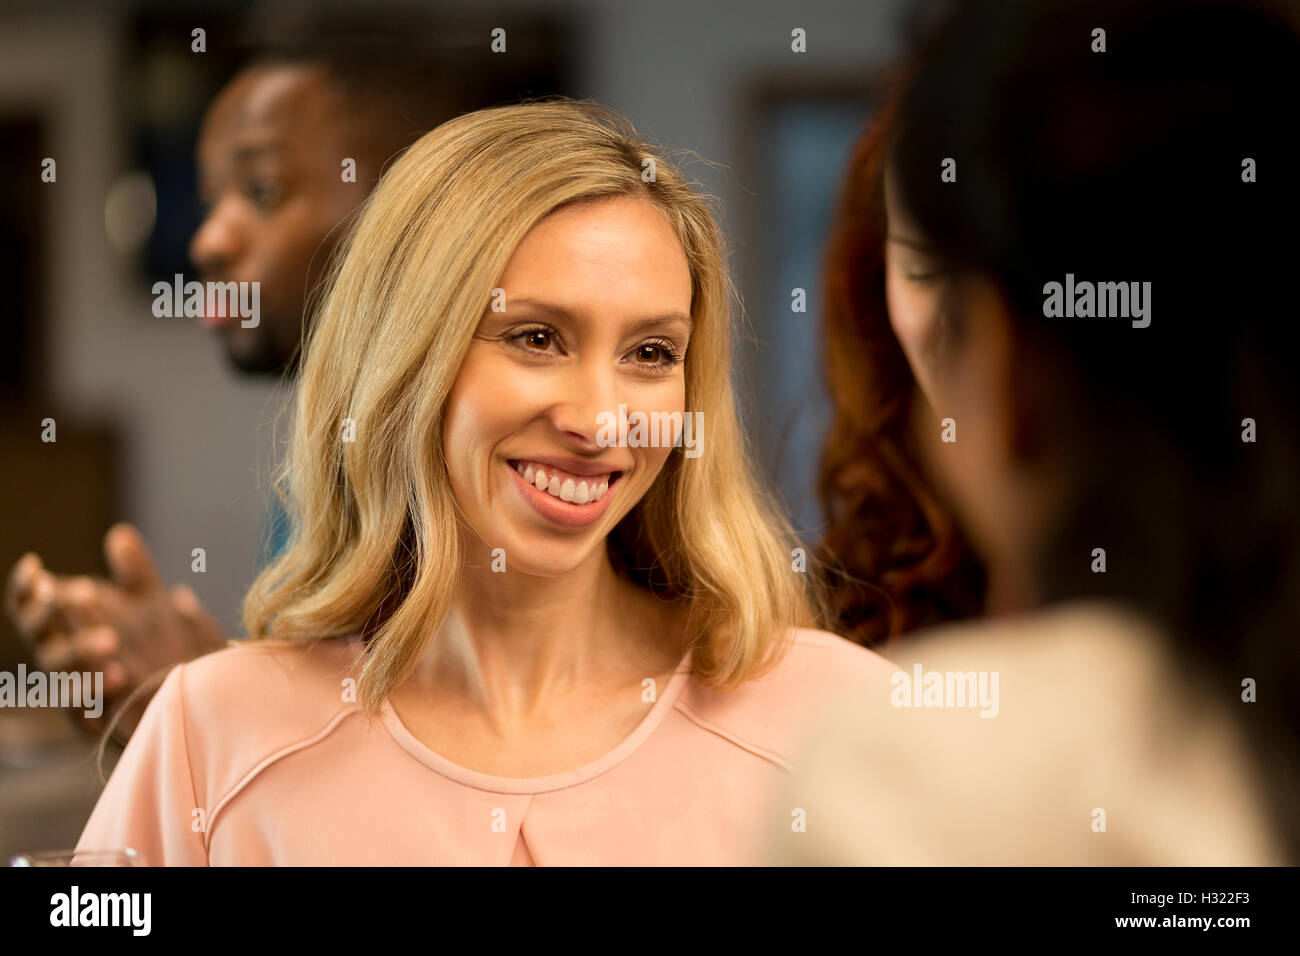 close up shot of a woman talking to her friends at a bar. Stock Photo